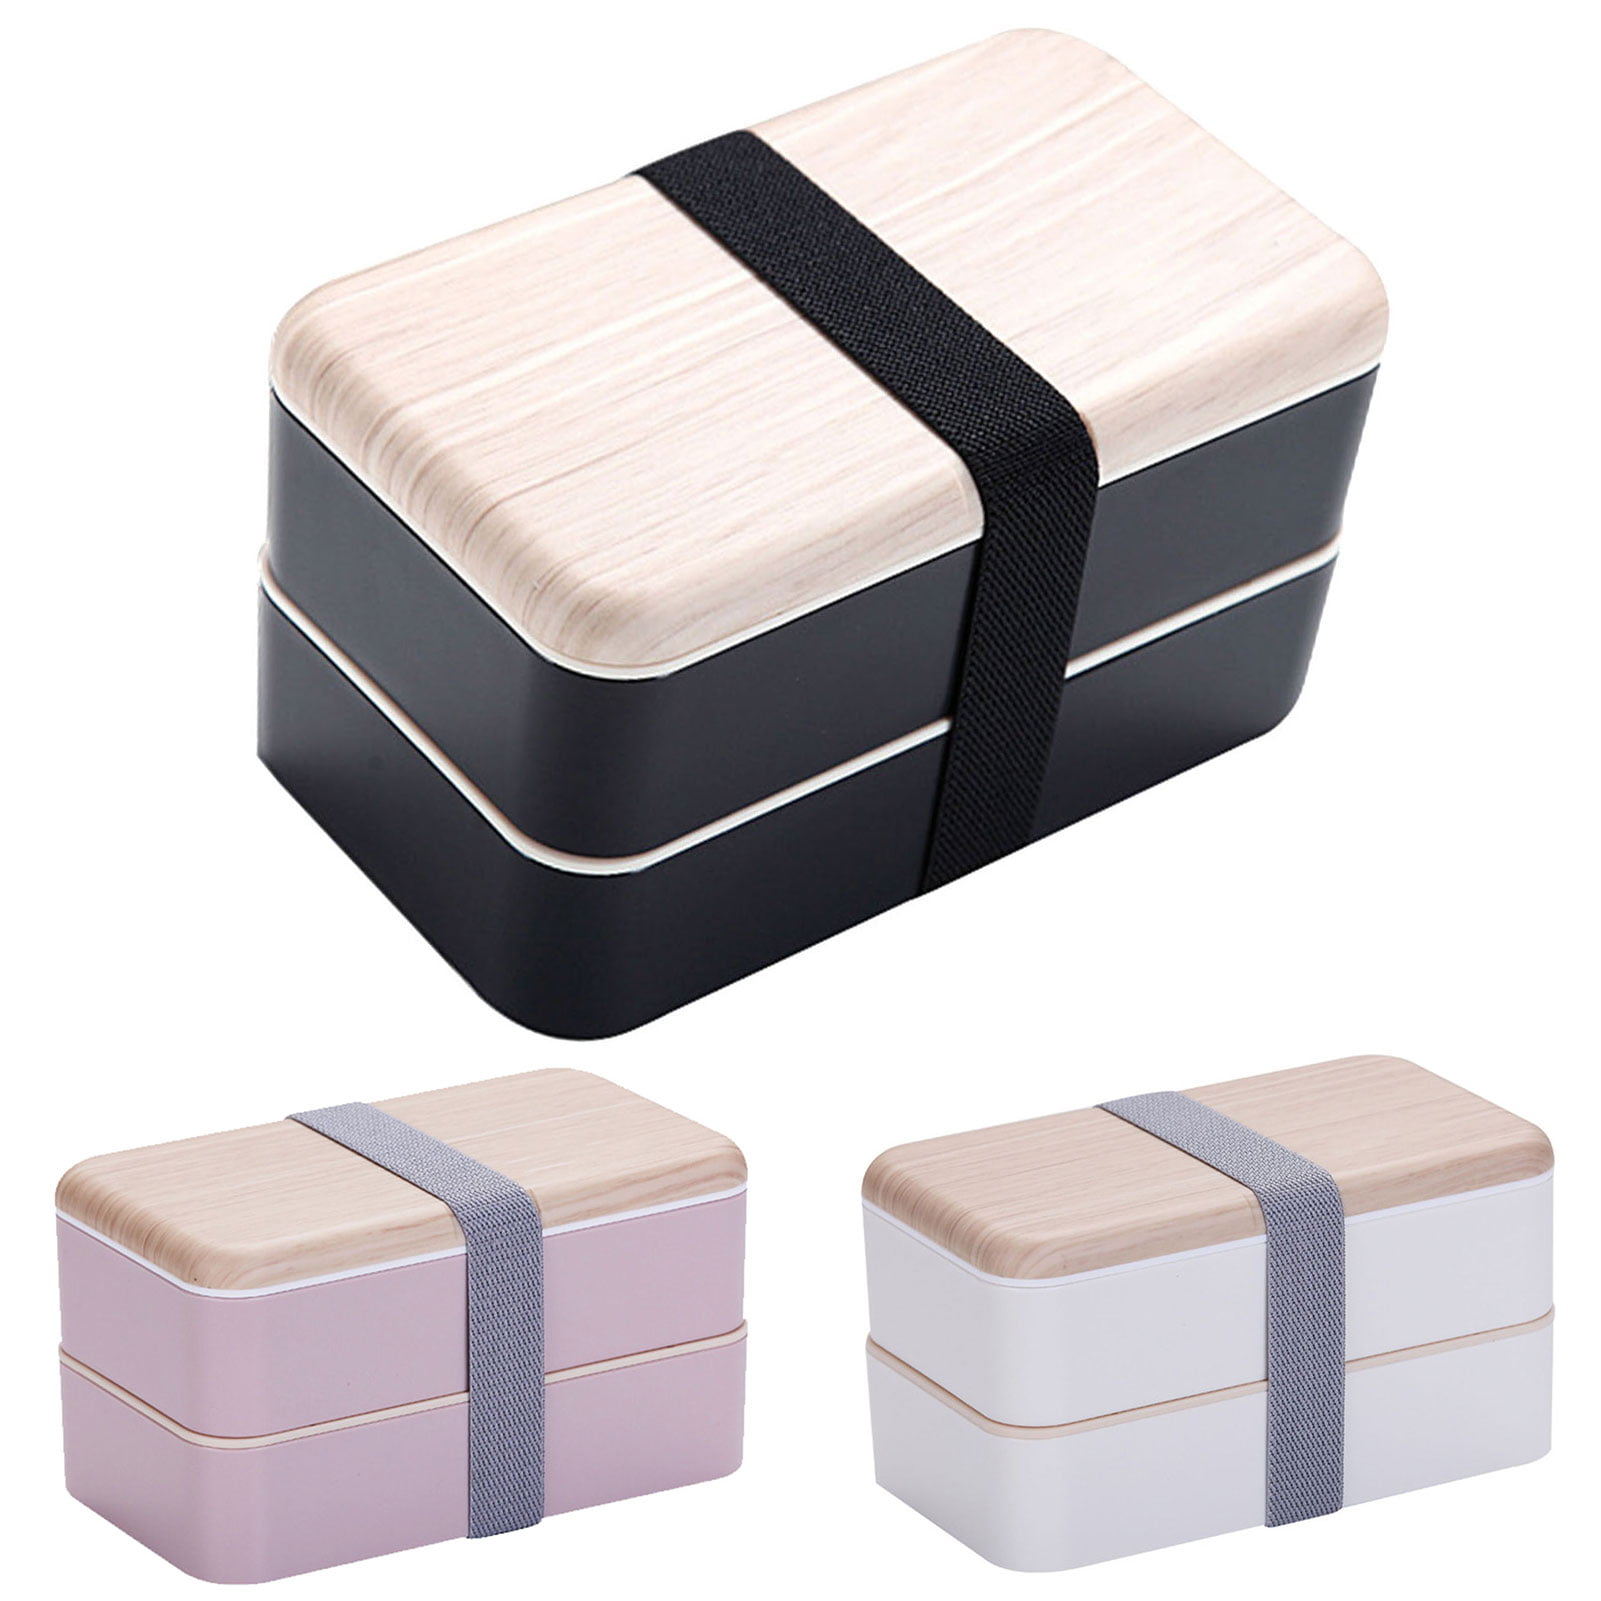 Microwave Lunch Box Japanese Wood Bento Box 2 Layer Container Storage Portable